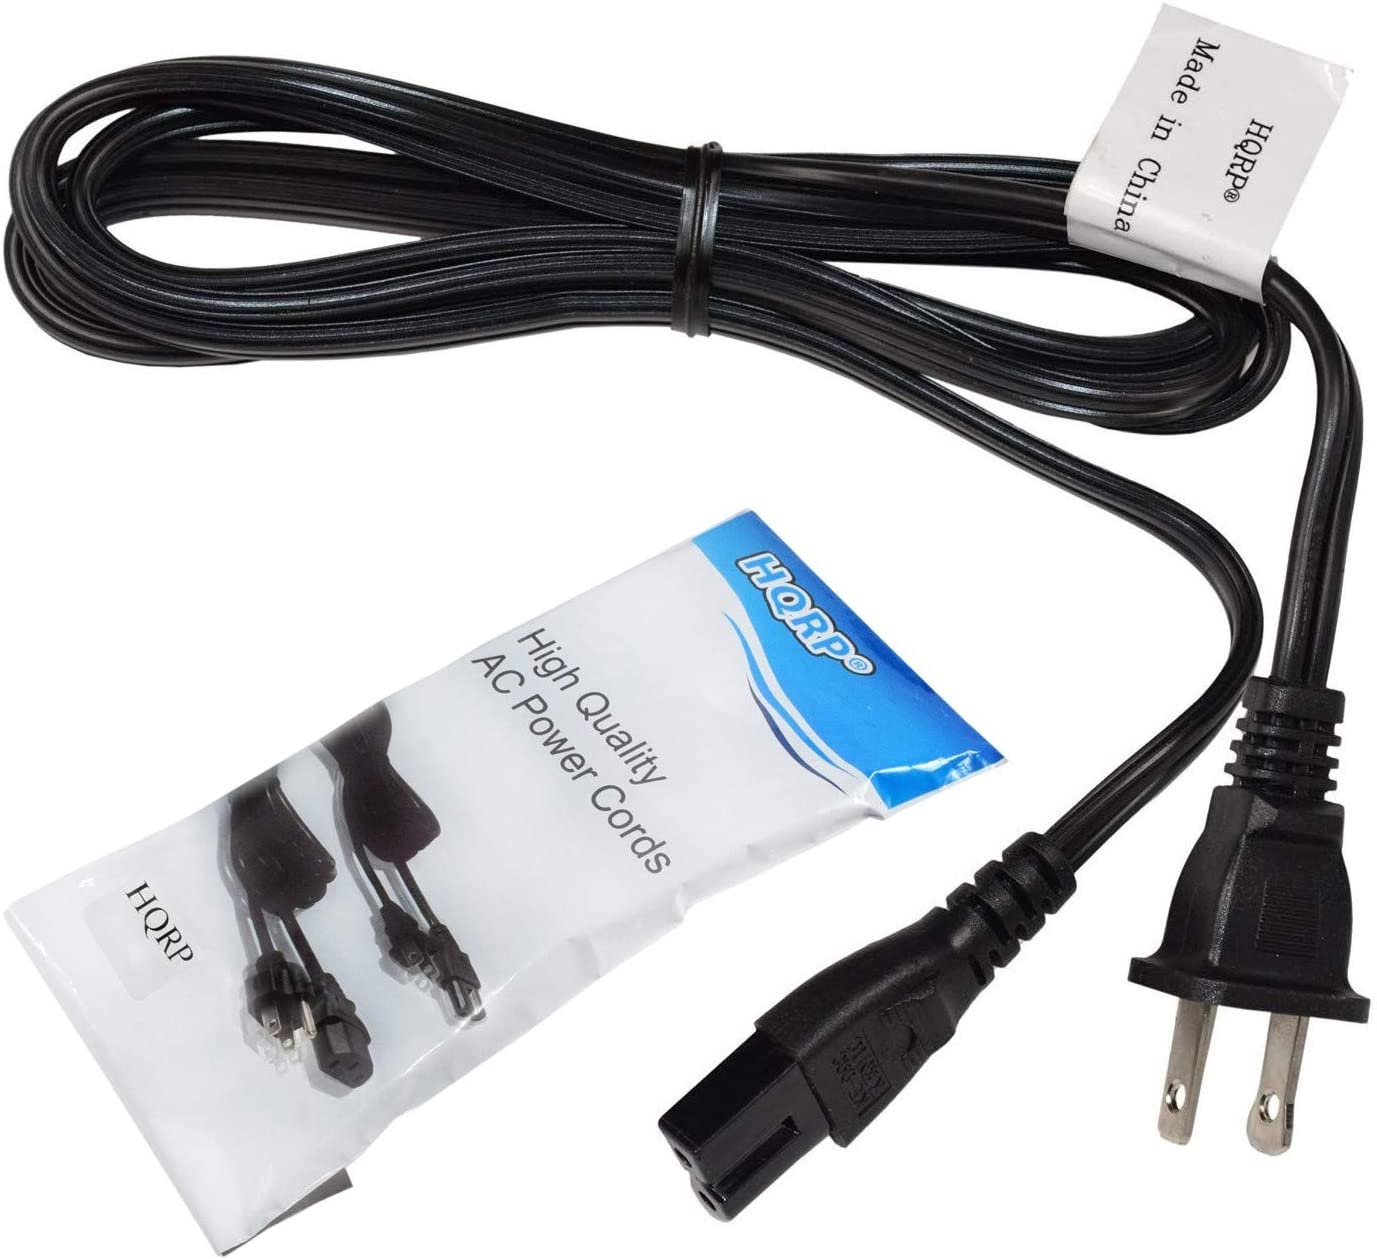 HQRP AC Power Cord works with COMPANION Stereo 3, 5 Speakers, Companion 3 Series II Multimedia Speaker System Mains Cable - image 1 of 7